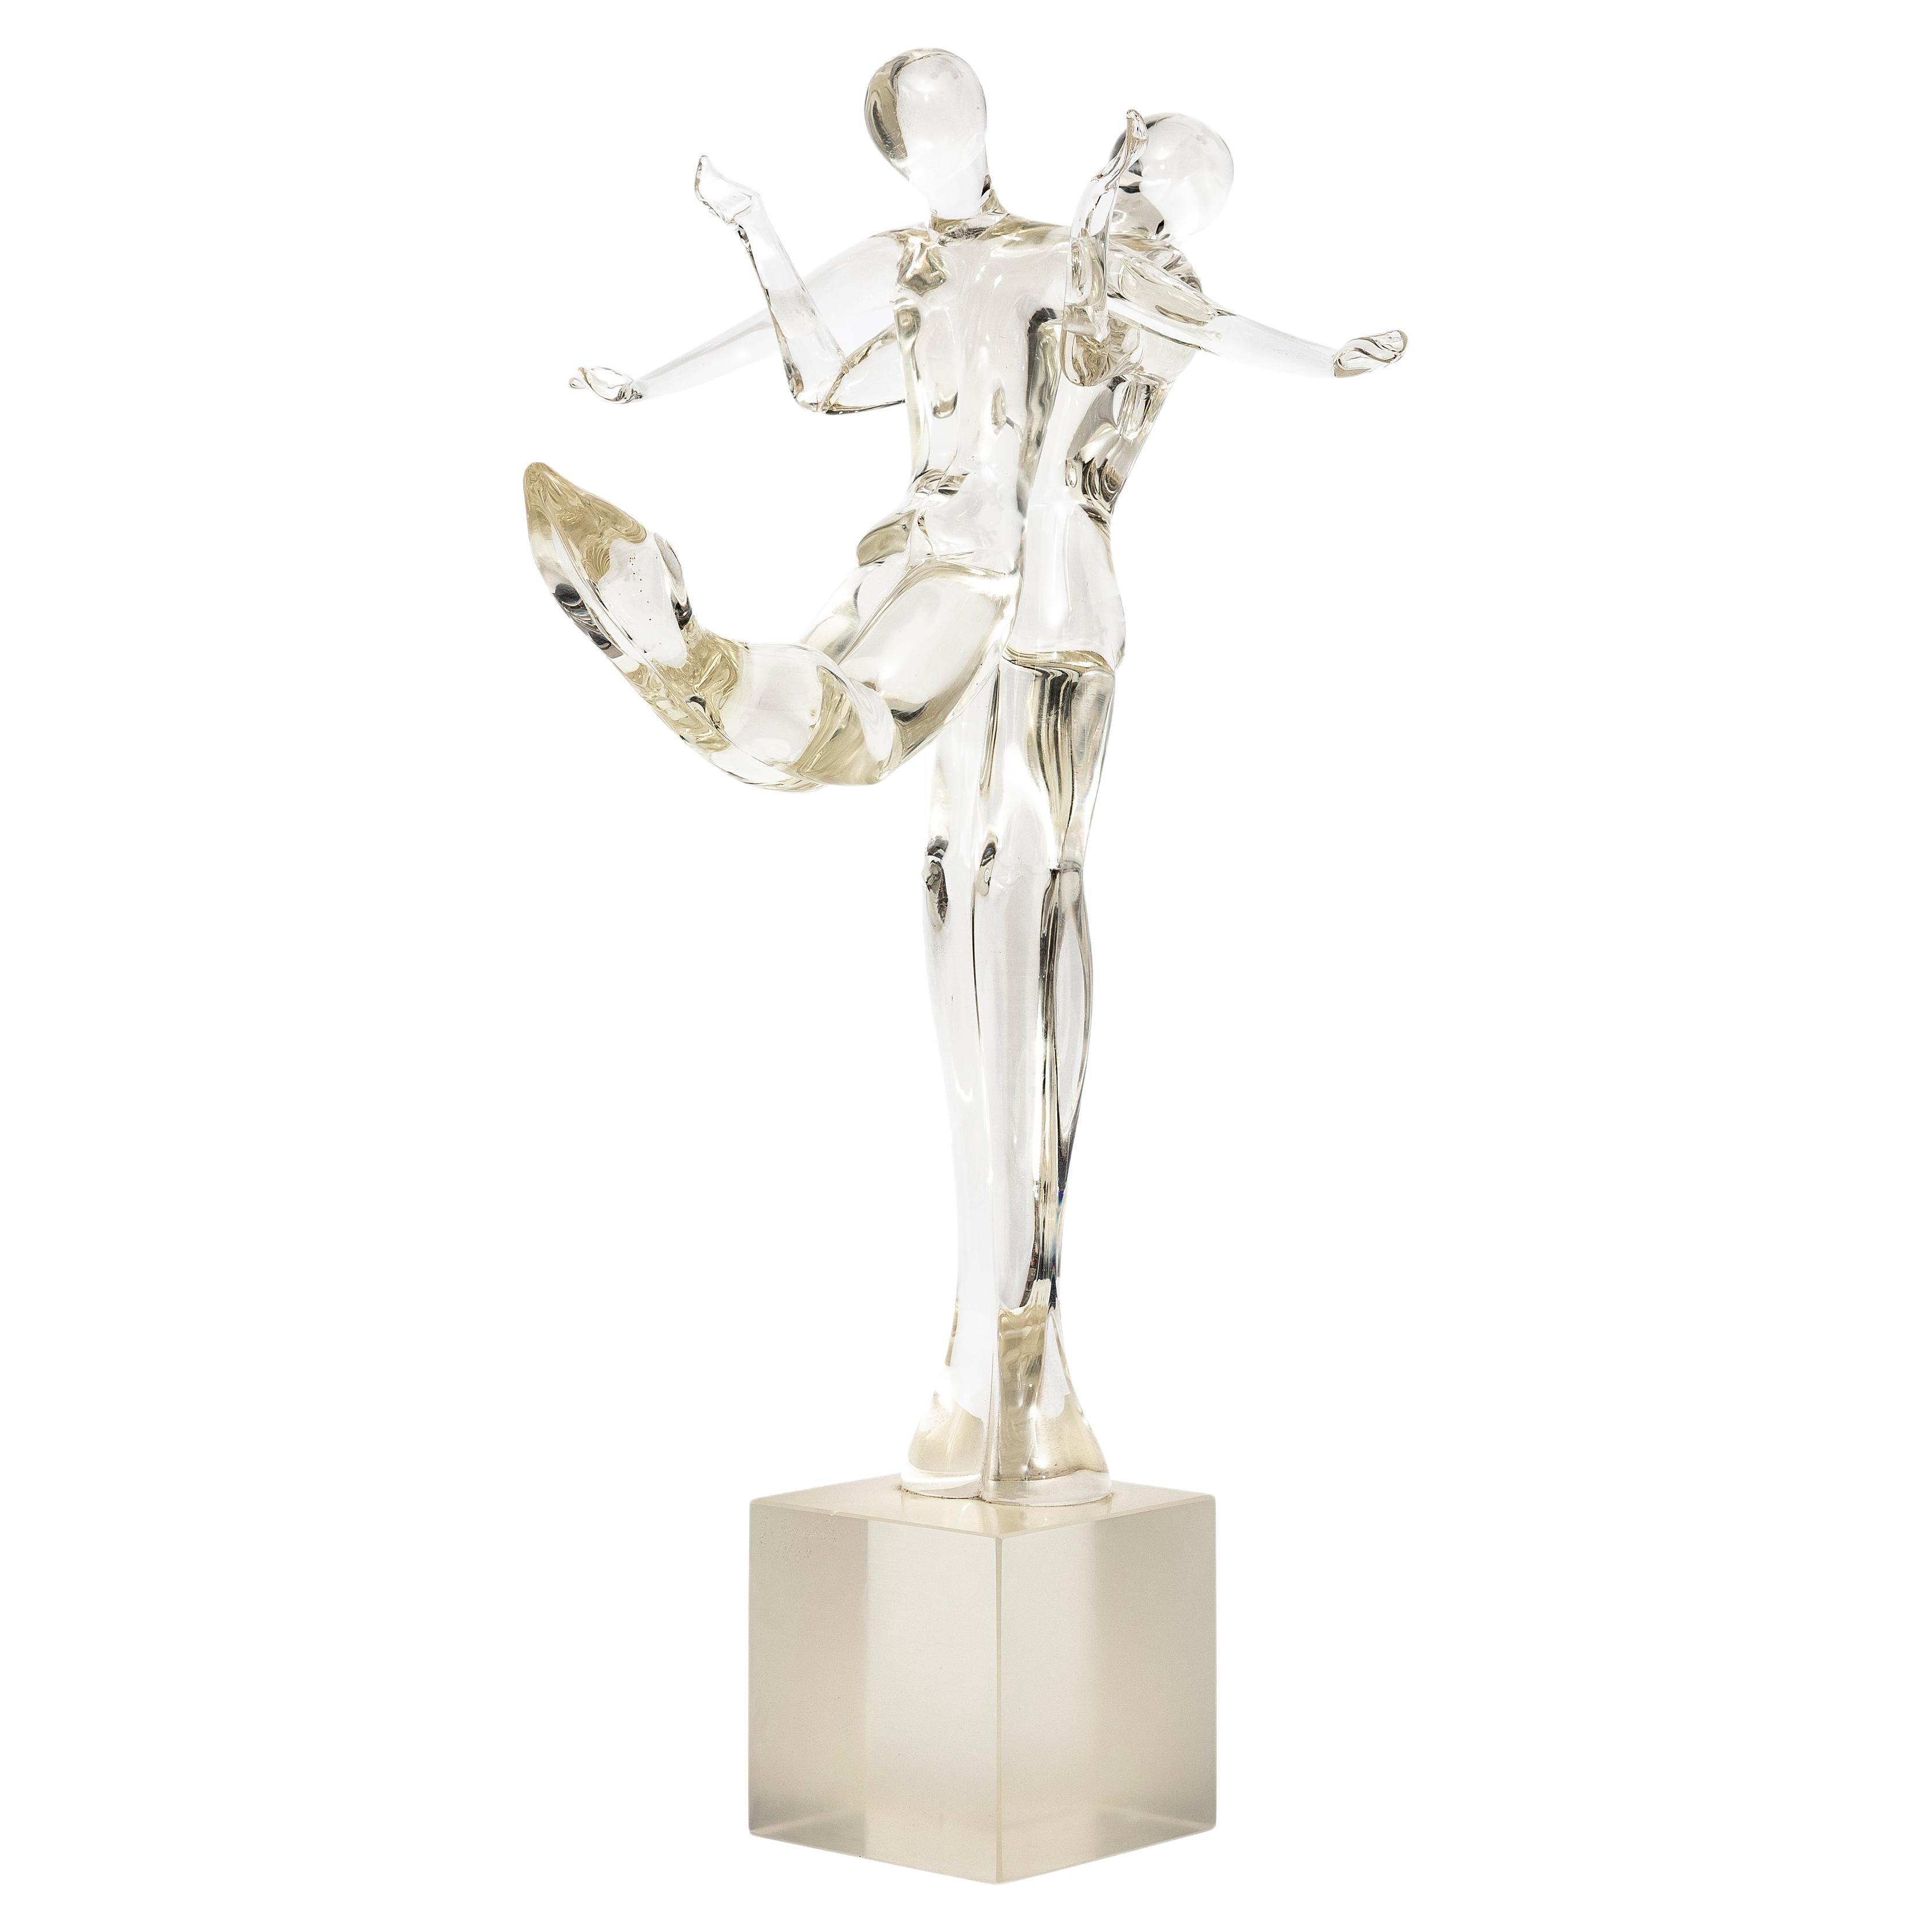 A Two-piece Renato Anatra Gymnast Dancer Sculpture by Murano Art Glass, Signed For Sale